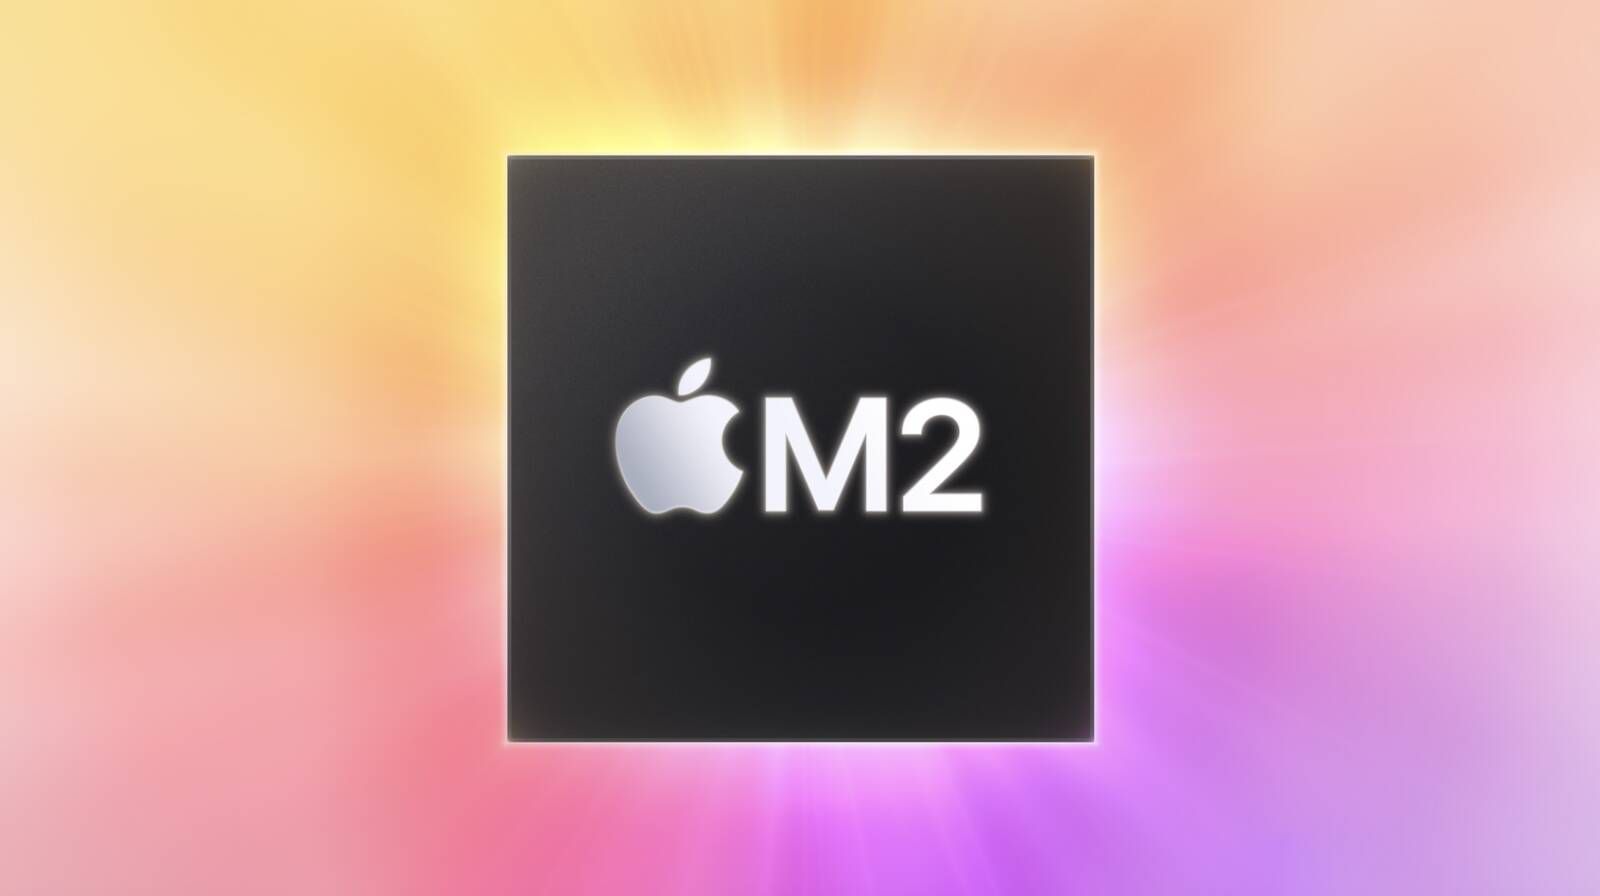 Apple Announces M2 Chip With Support for Up to 24GB Memory - macrumors.com